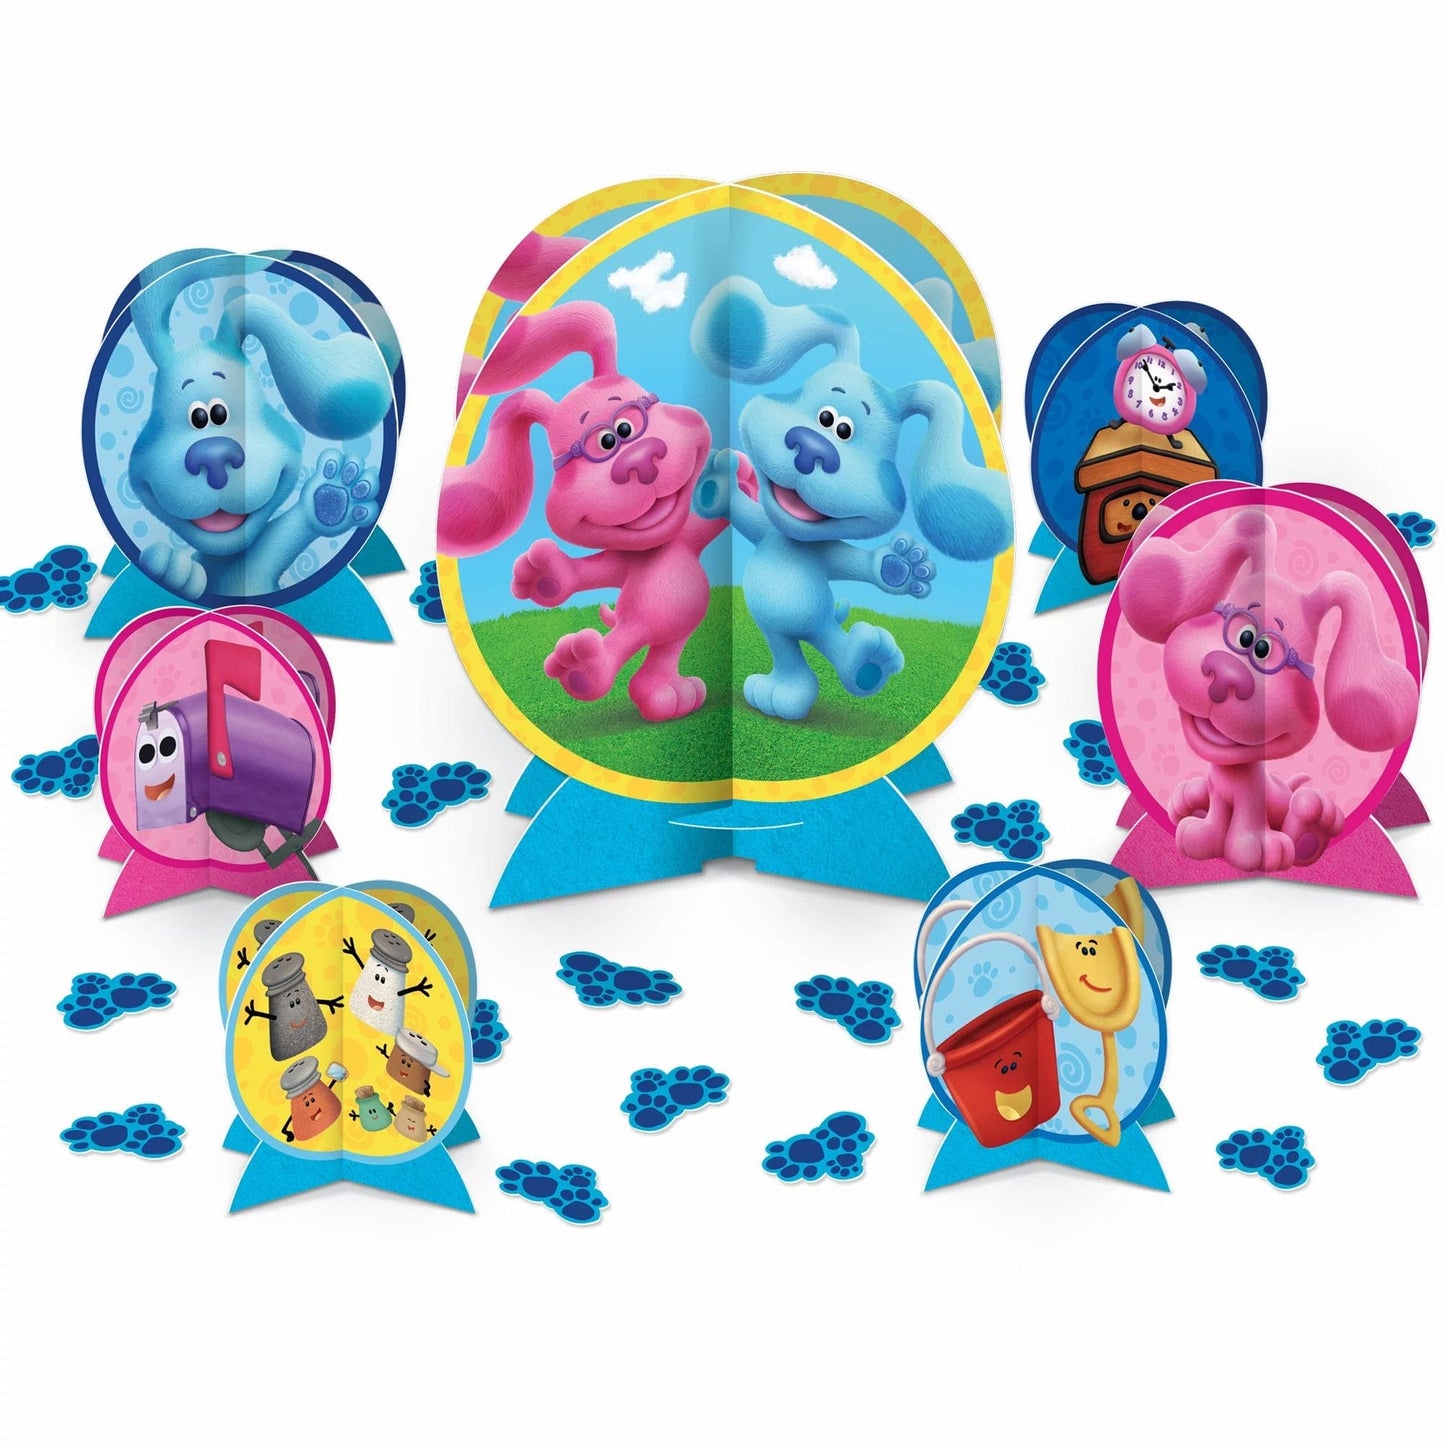 Nickelodeon Blues Clues Table Centerpiece Decorating Kit 7 piece